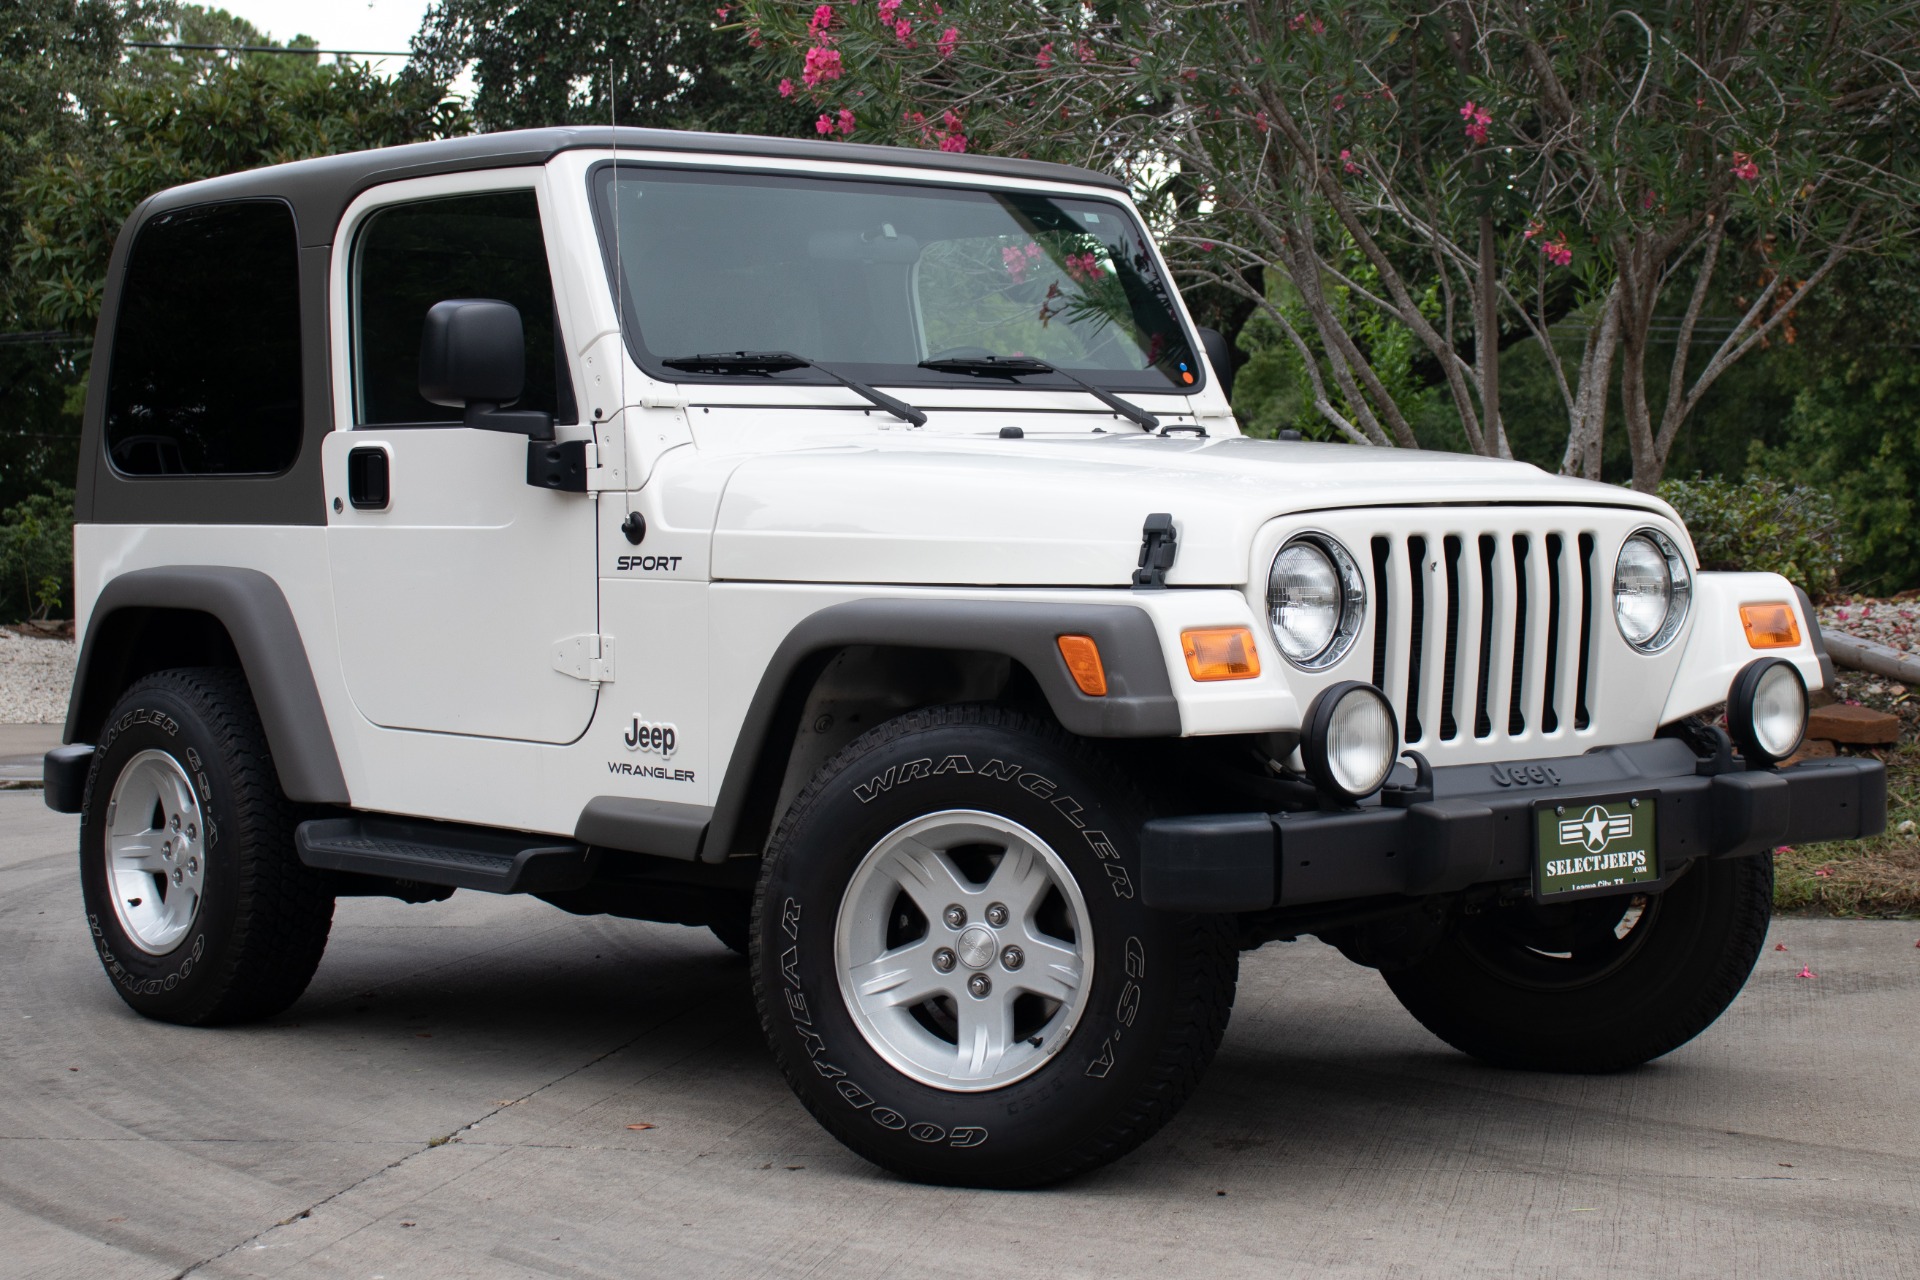 Used 2005 Jeep Wrangler 2dr Sport For Sale ($26,995) | Select Jeeps Inc.  Stock #330717